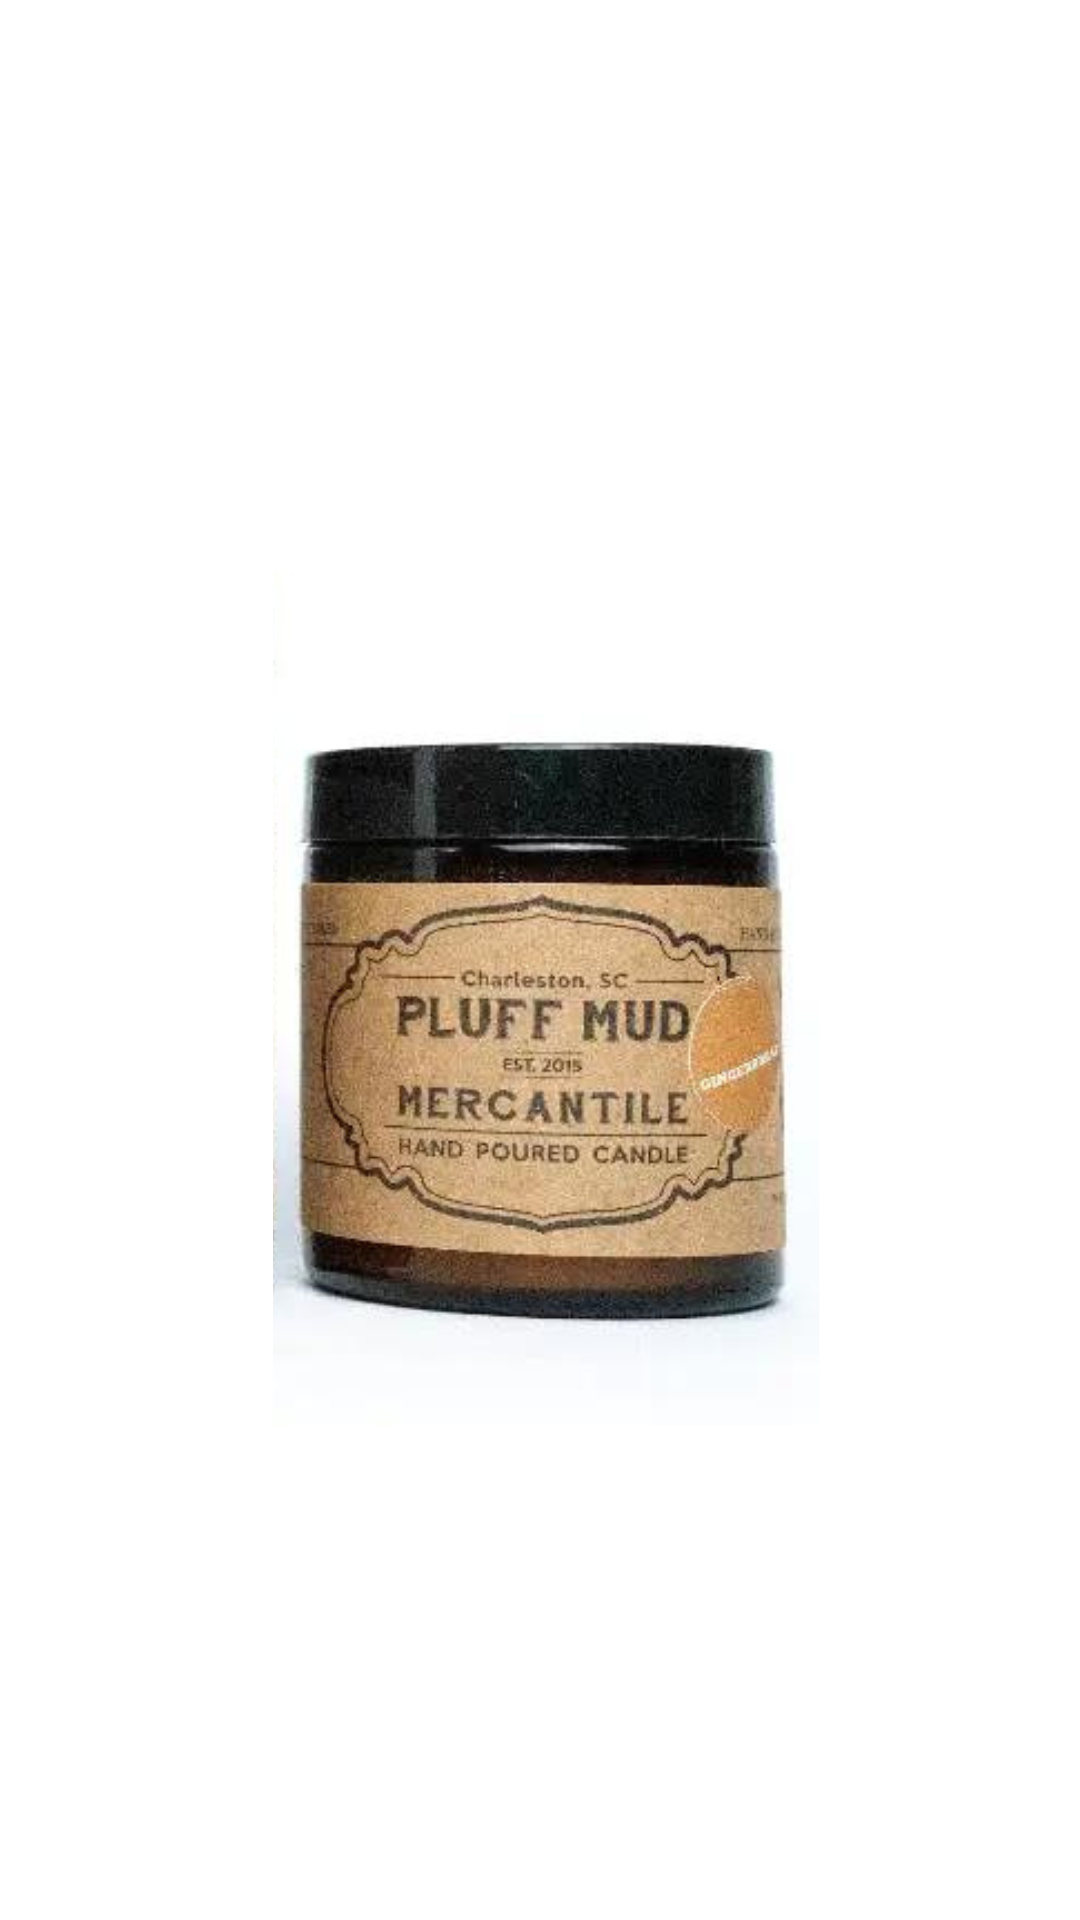 Campfire Hand Poured Soy Candle - Pluff Mud Mercantile